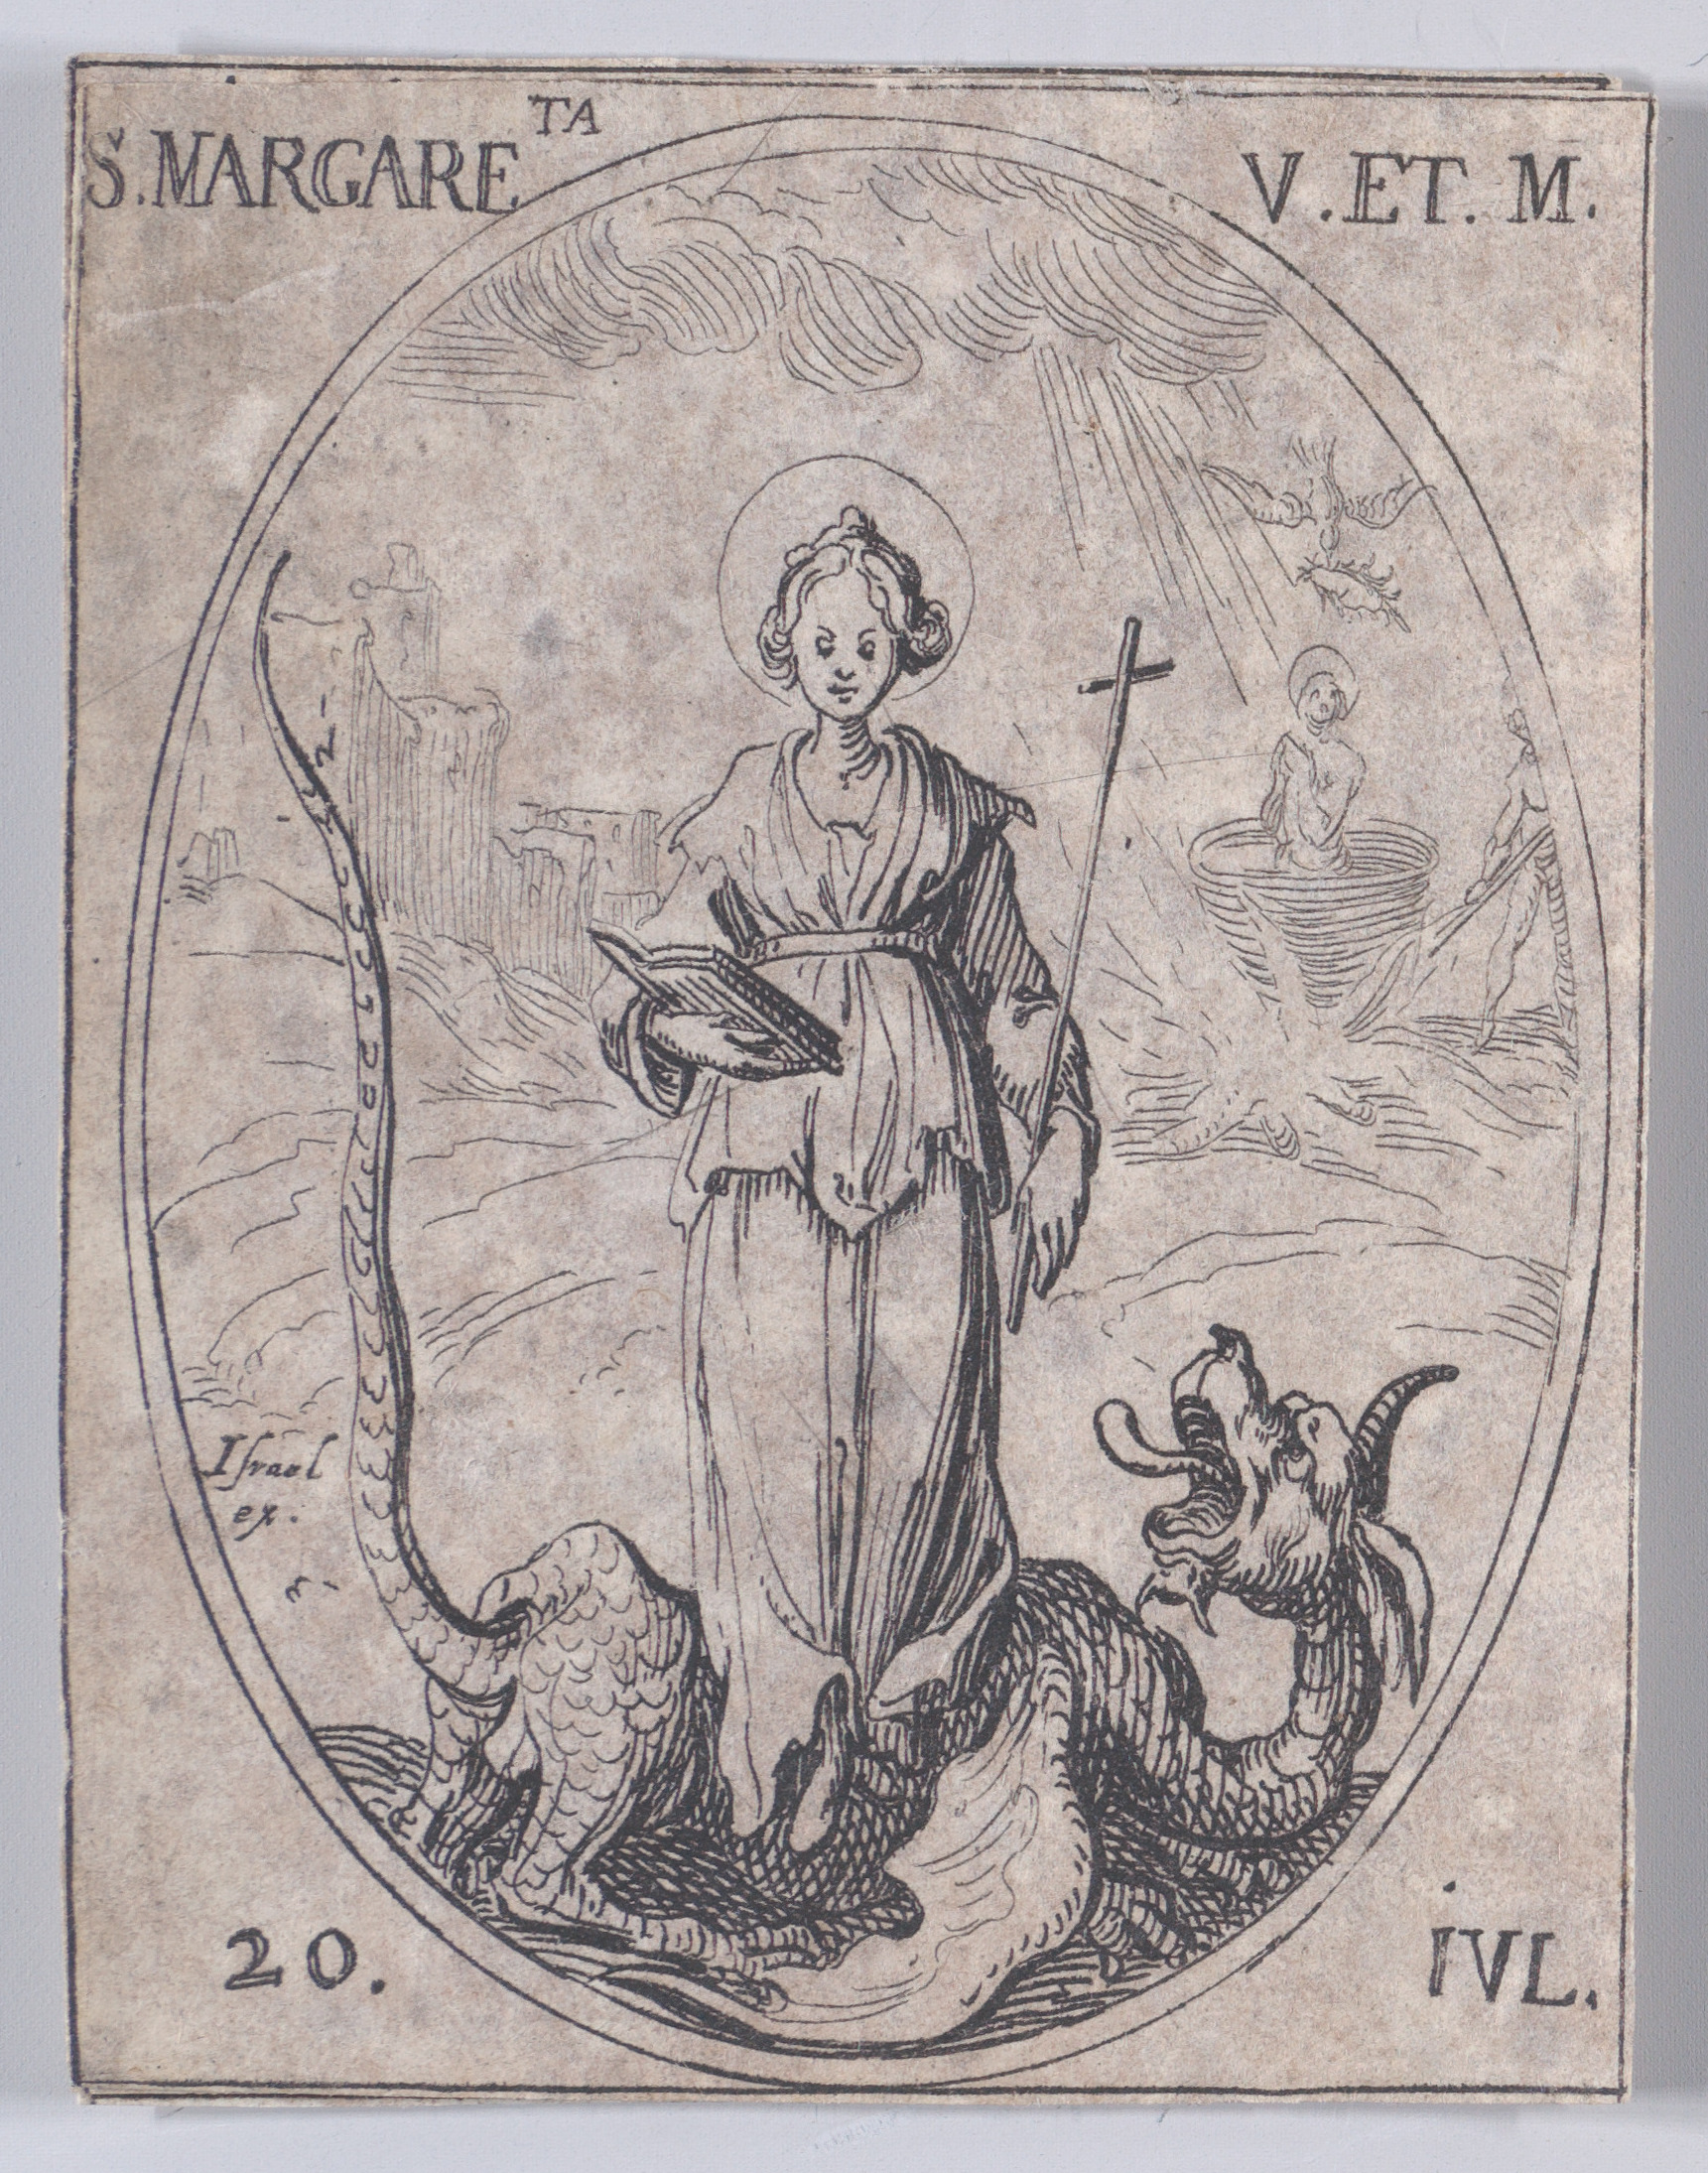 Ste. Marguerite, vierge et martyre (St. Margaret of Antioch, Virgin and Martyr), July 20th, from Les Images De Tous Les Saincts et Saintes de L'Année (Images of All of the Saints and Religious Events of the Year), Jacques Callot (French, Nancy 1592–1635 Nancy), Etching; second state of two (Lieure)